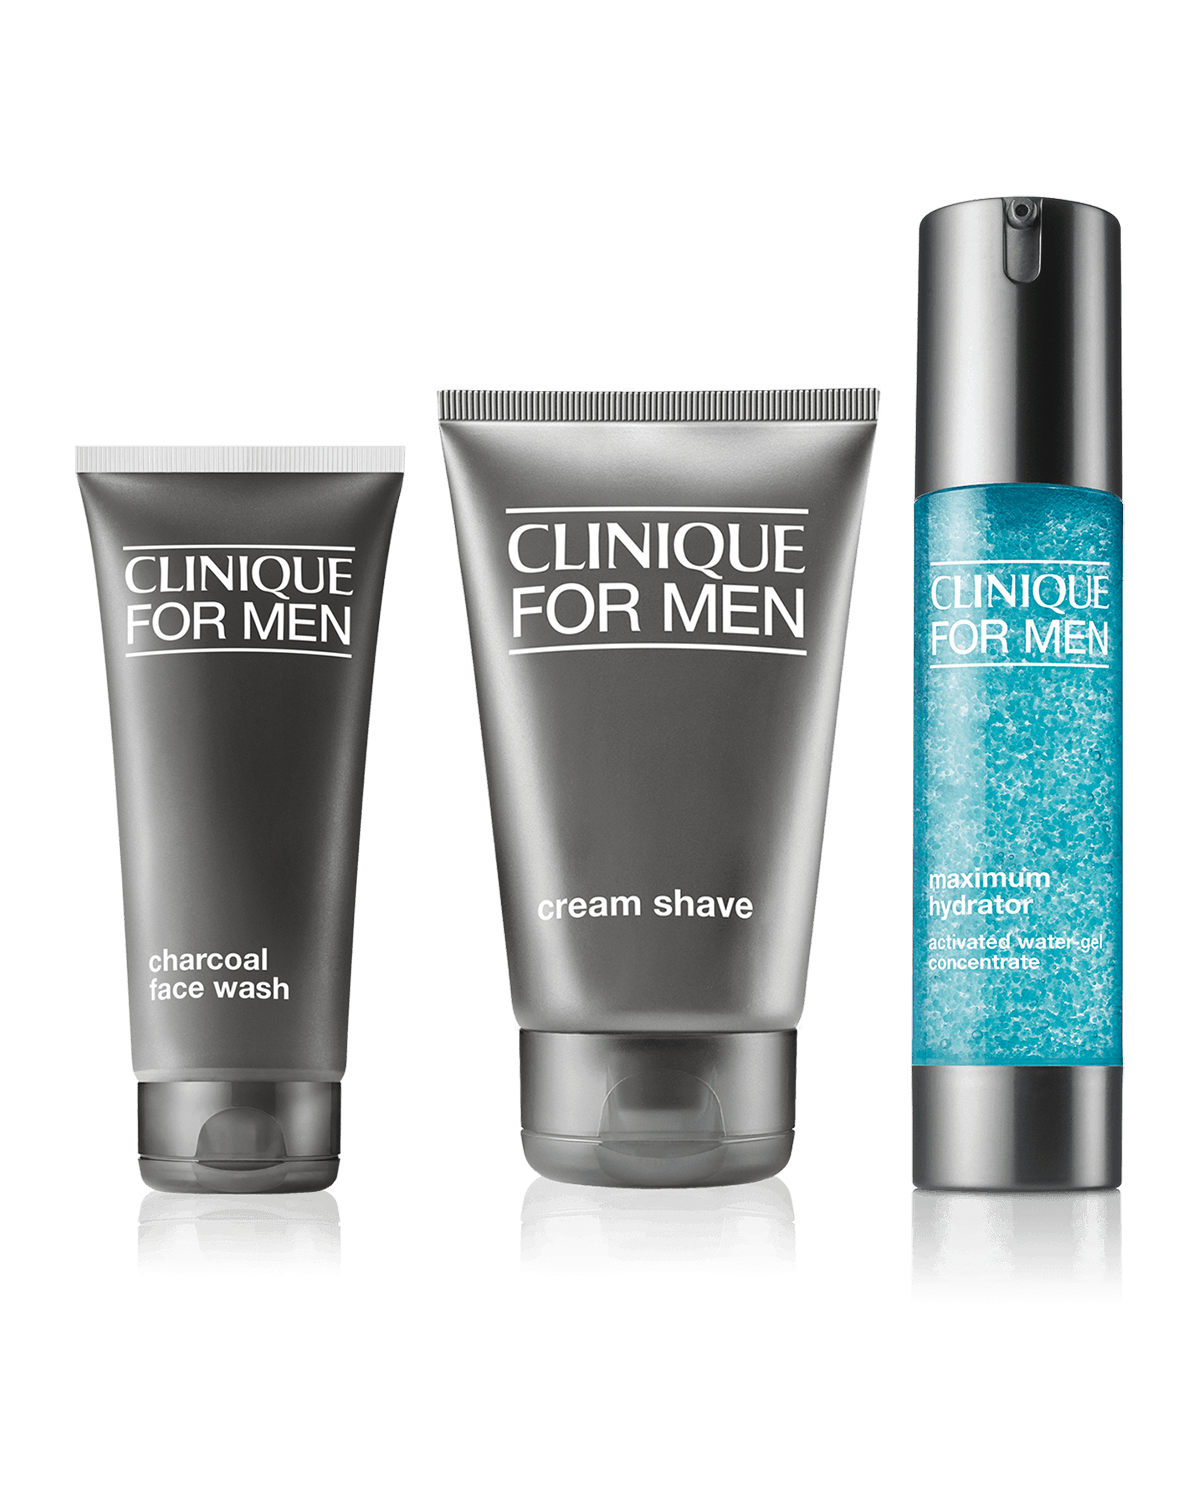 CLINIQUE FOR MEN CUSTOM-FIT DAILY INTENSE HYDRATION